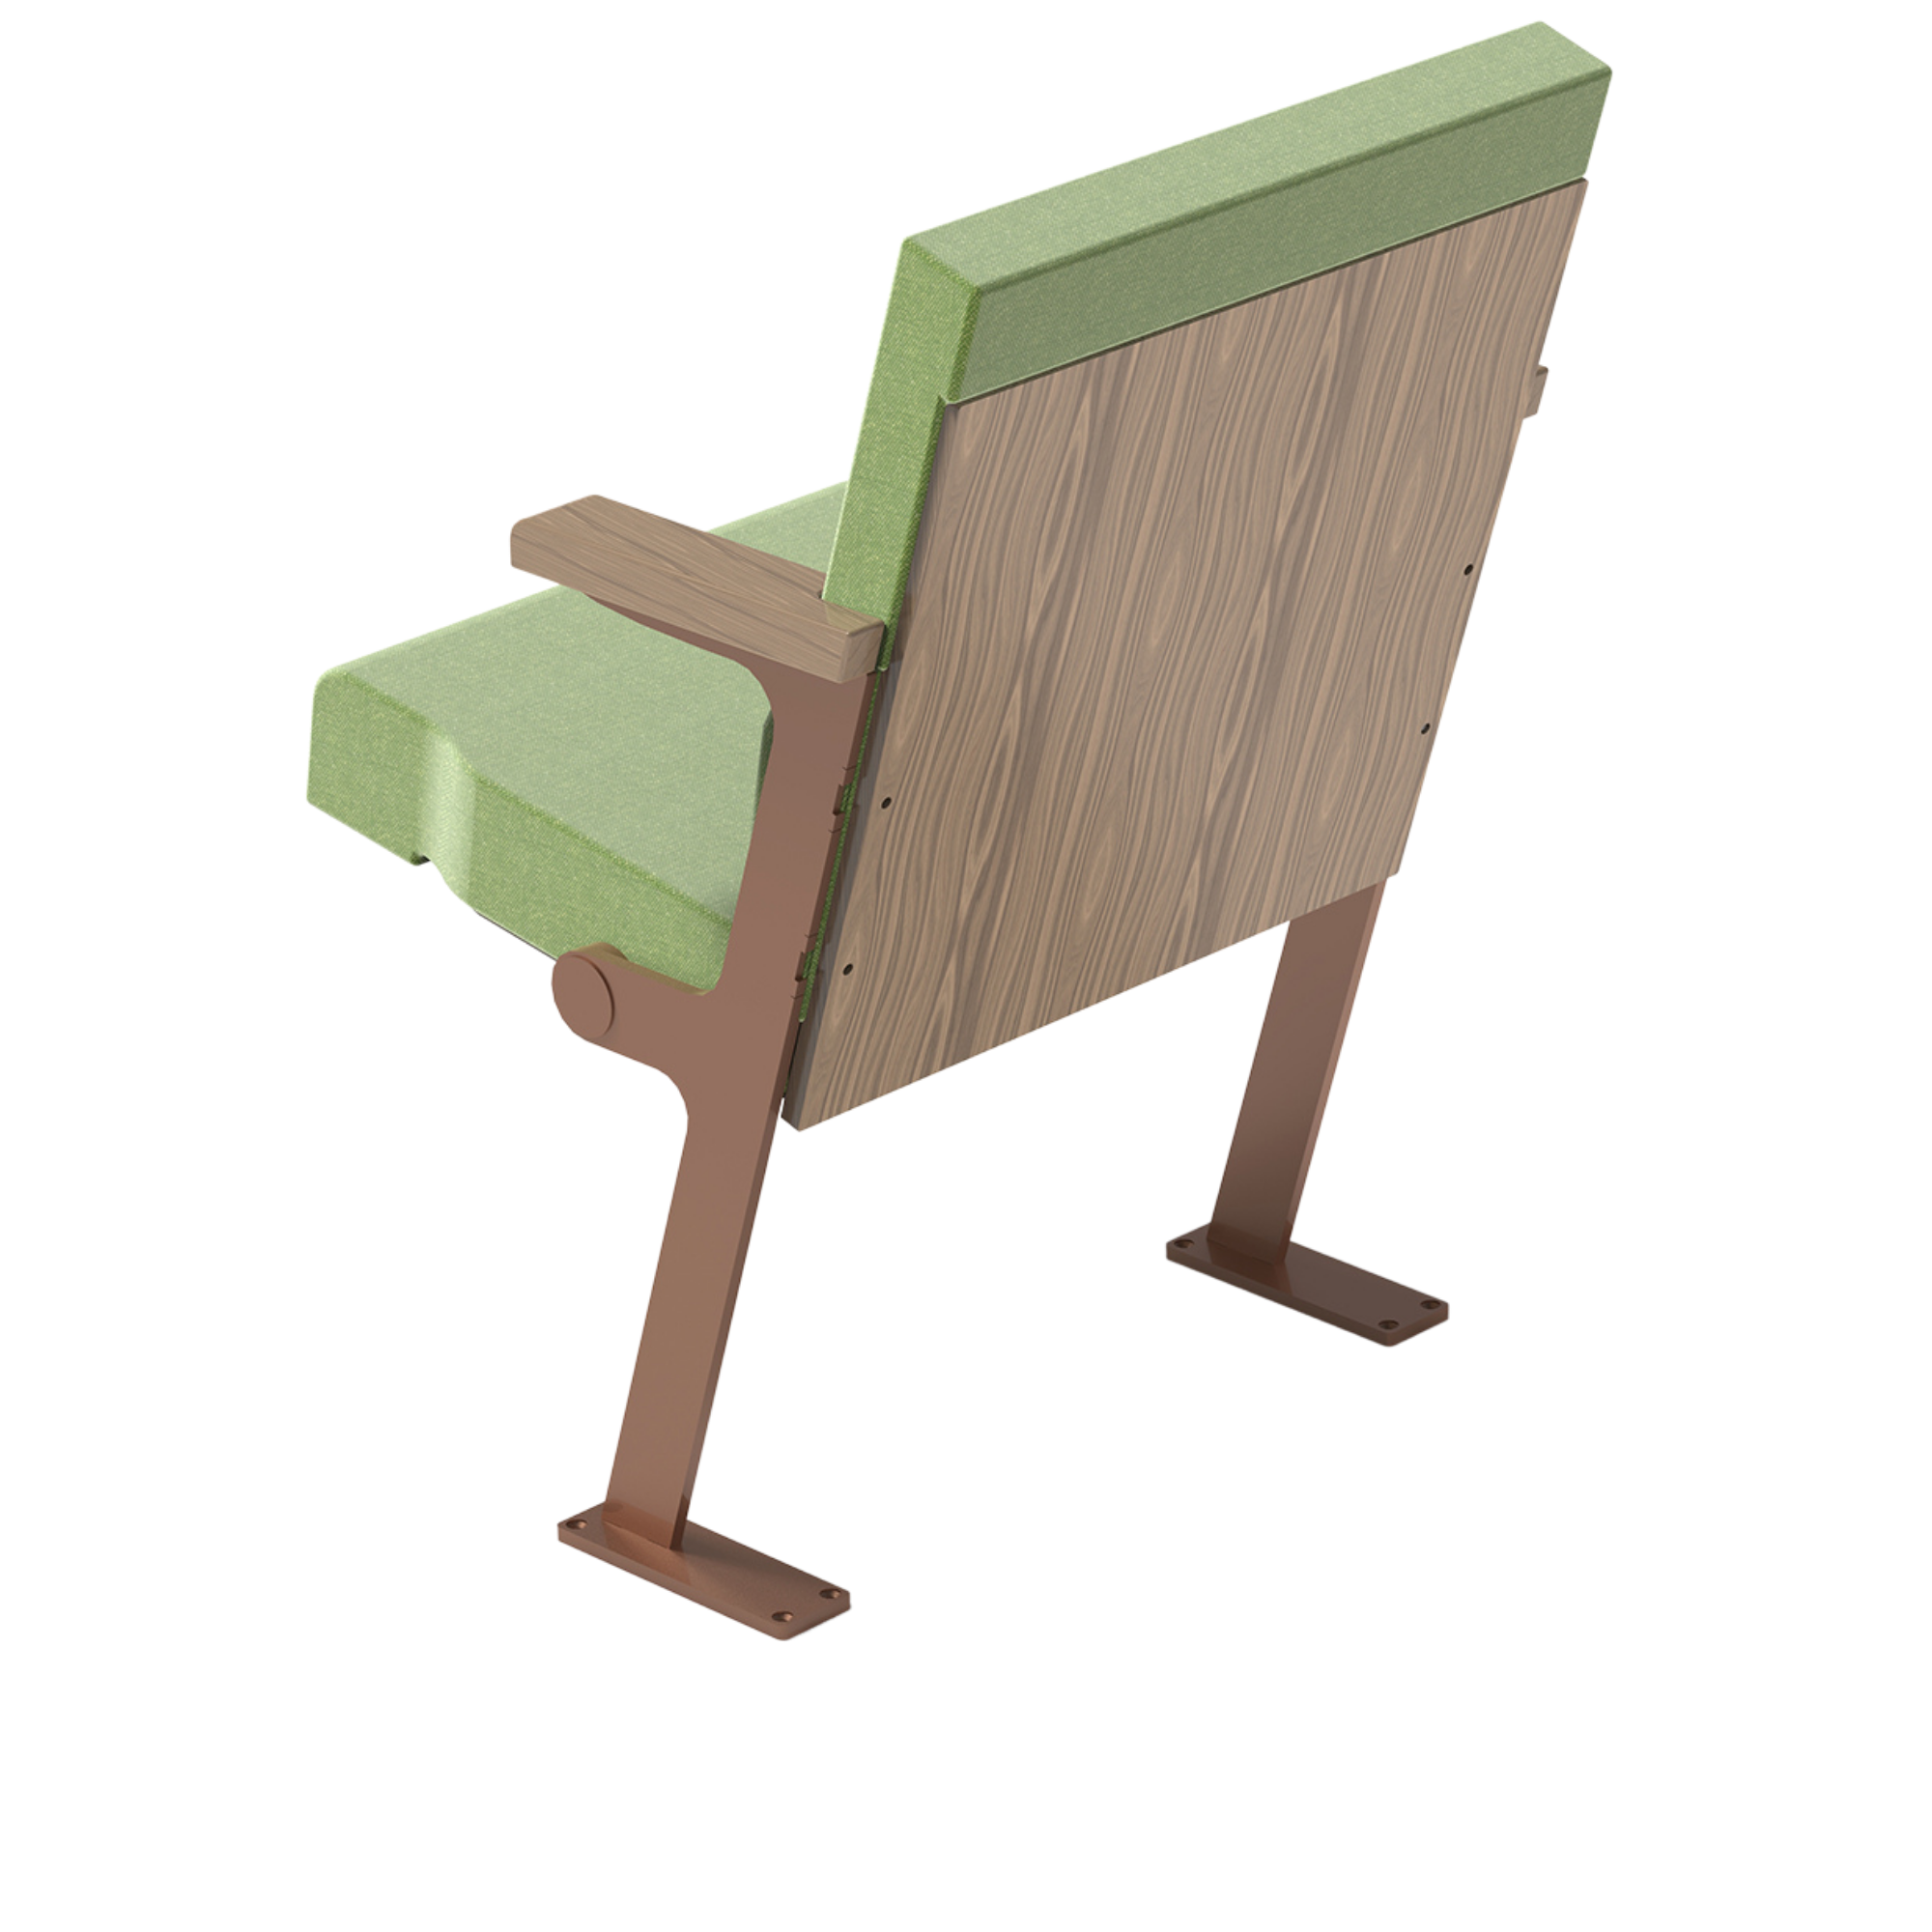 A green upholstered tip up chair with a wooden frame.